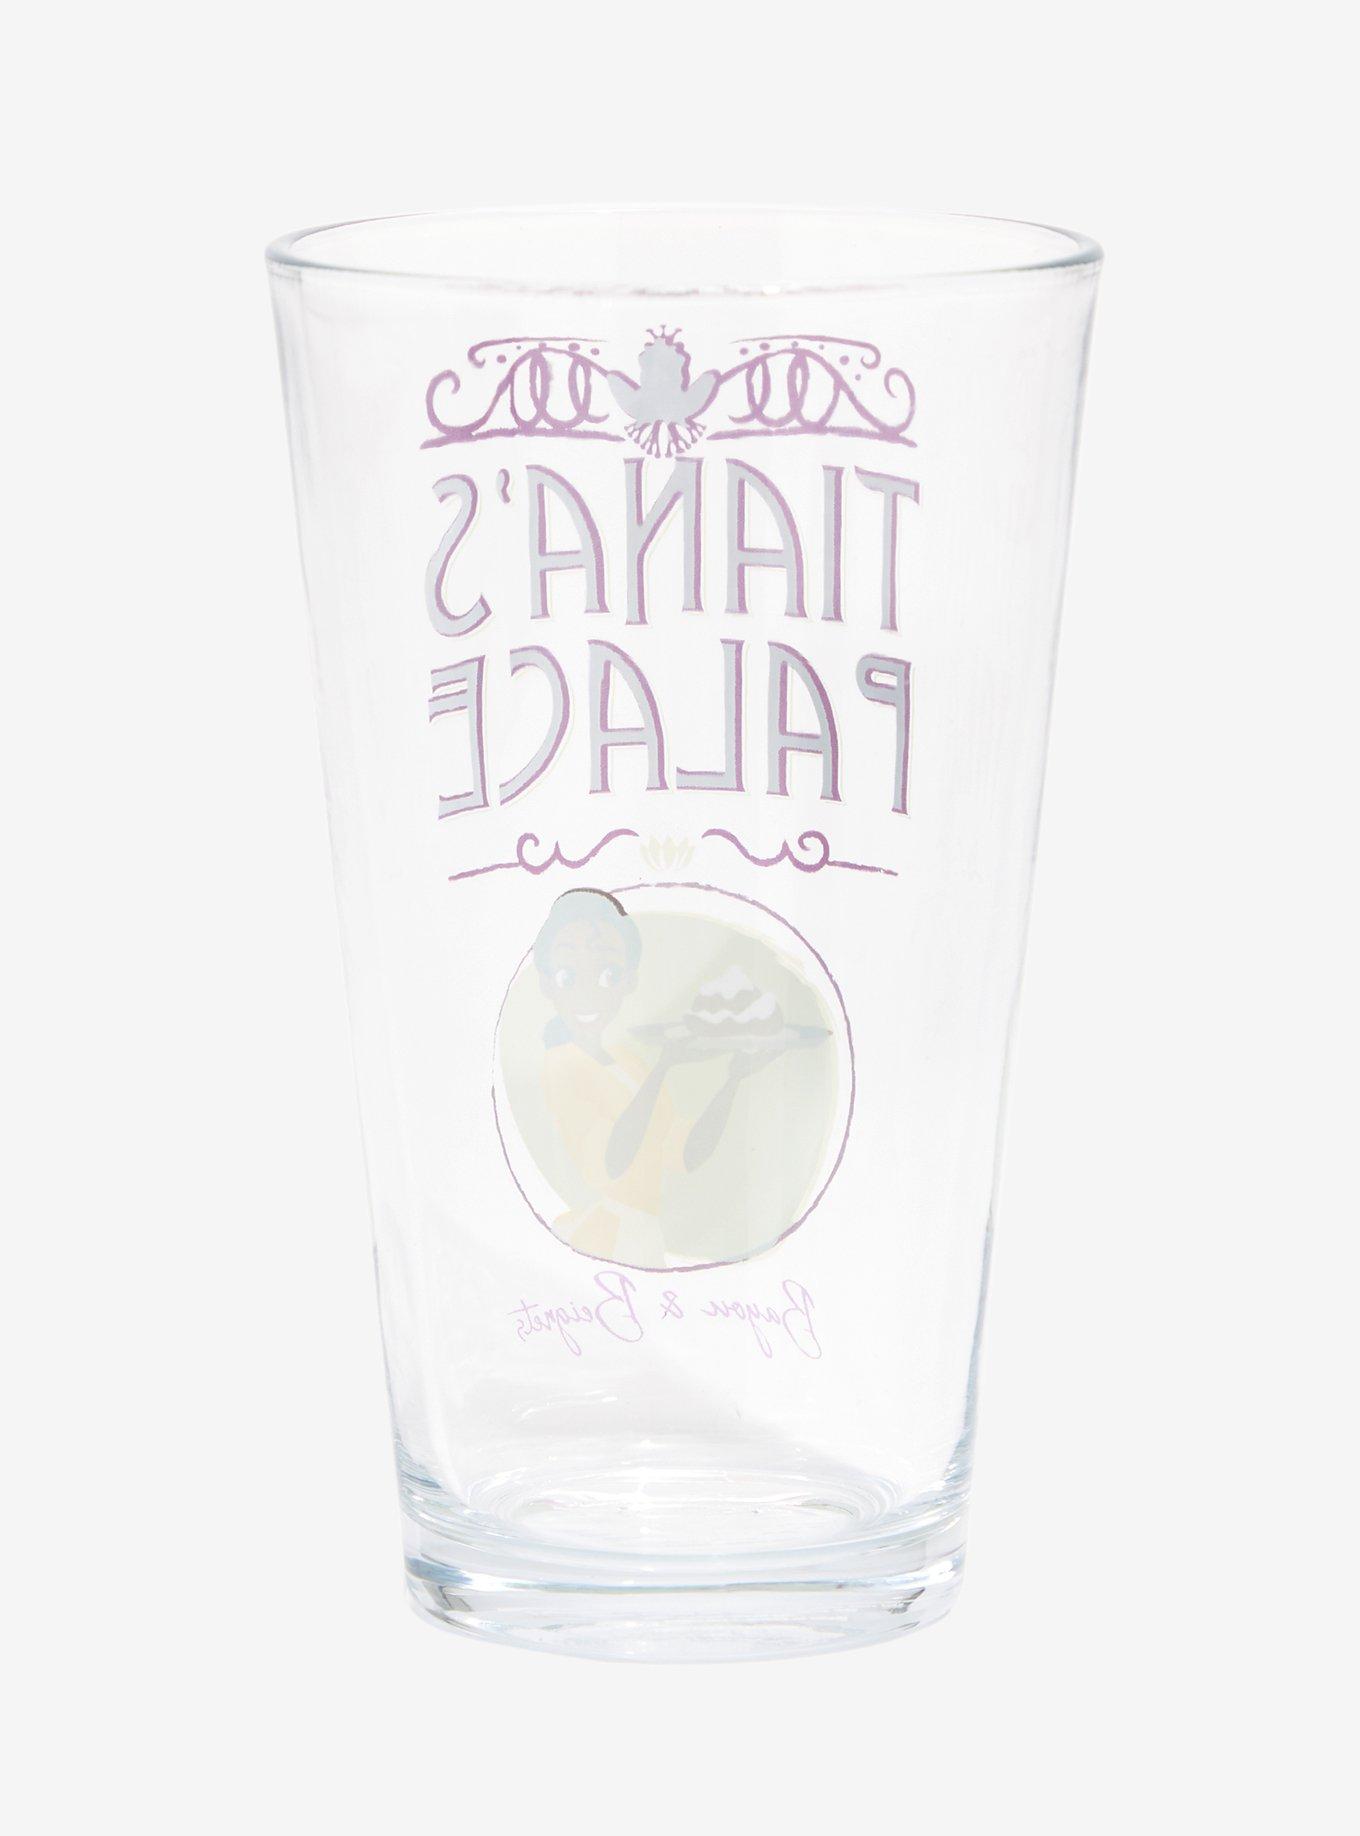 Disney The Princess and the Frog Tiana’s Palace Pint Glass - BoxLunch Exclusive, , hi-res